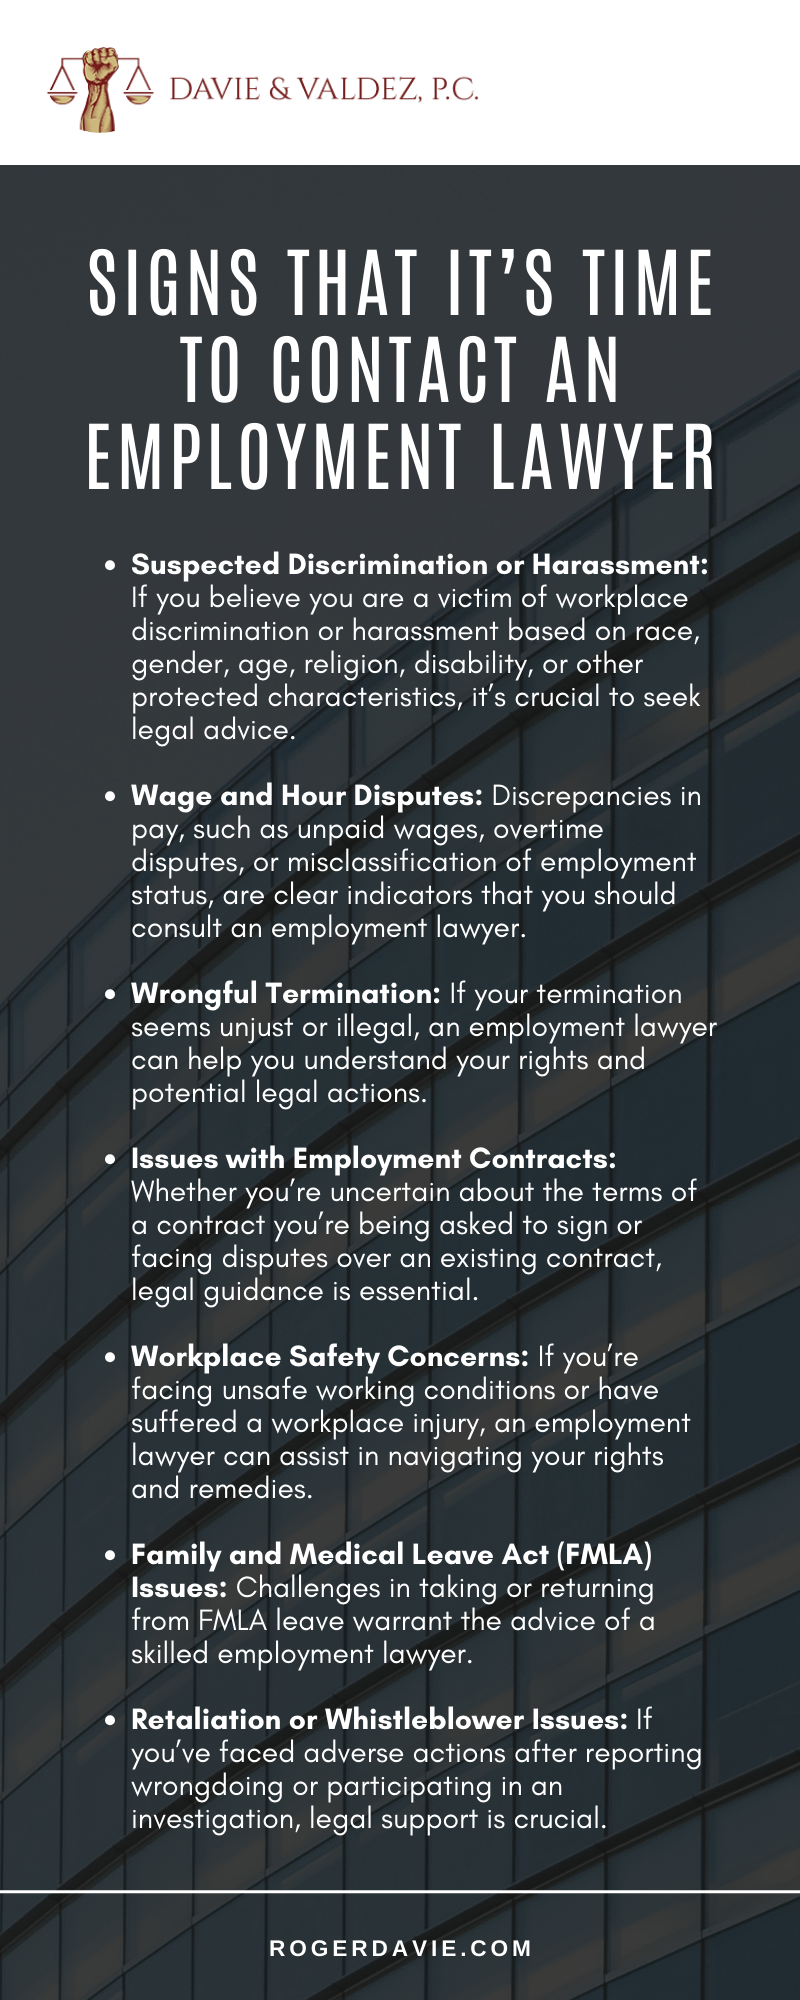 Signs That It's Time To Contact An Employment Lawyer Infographic